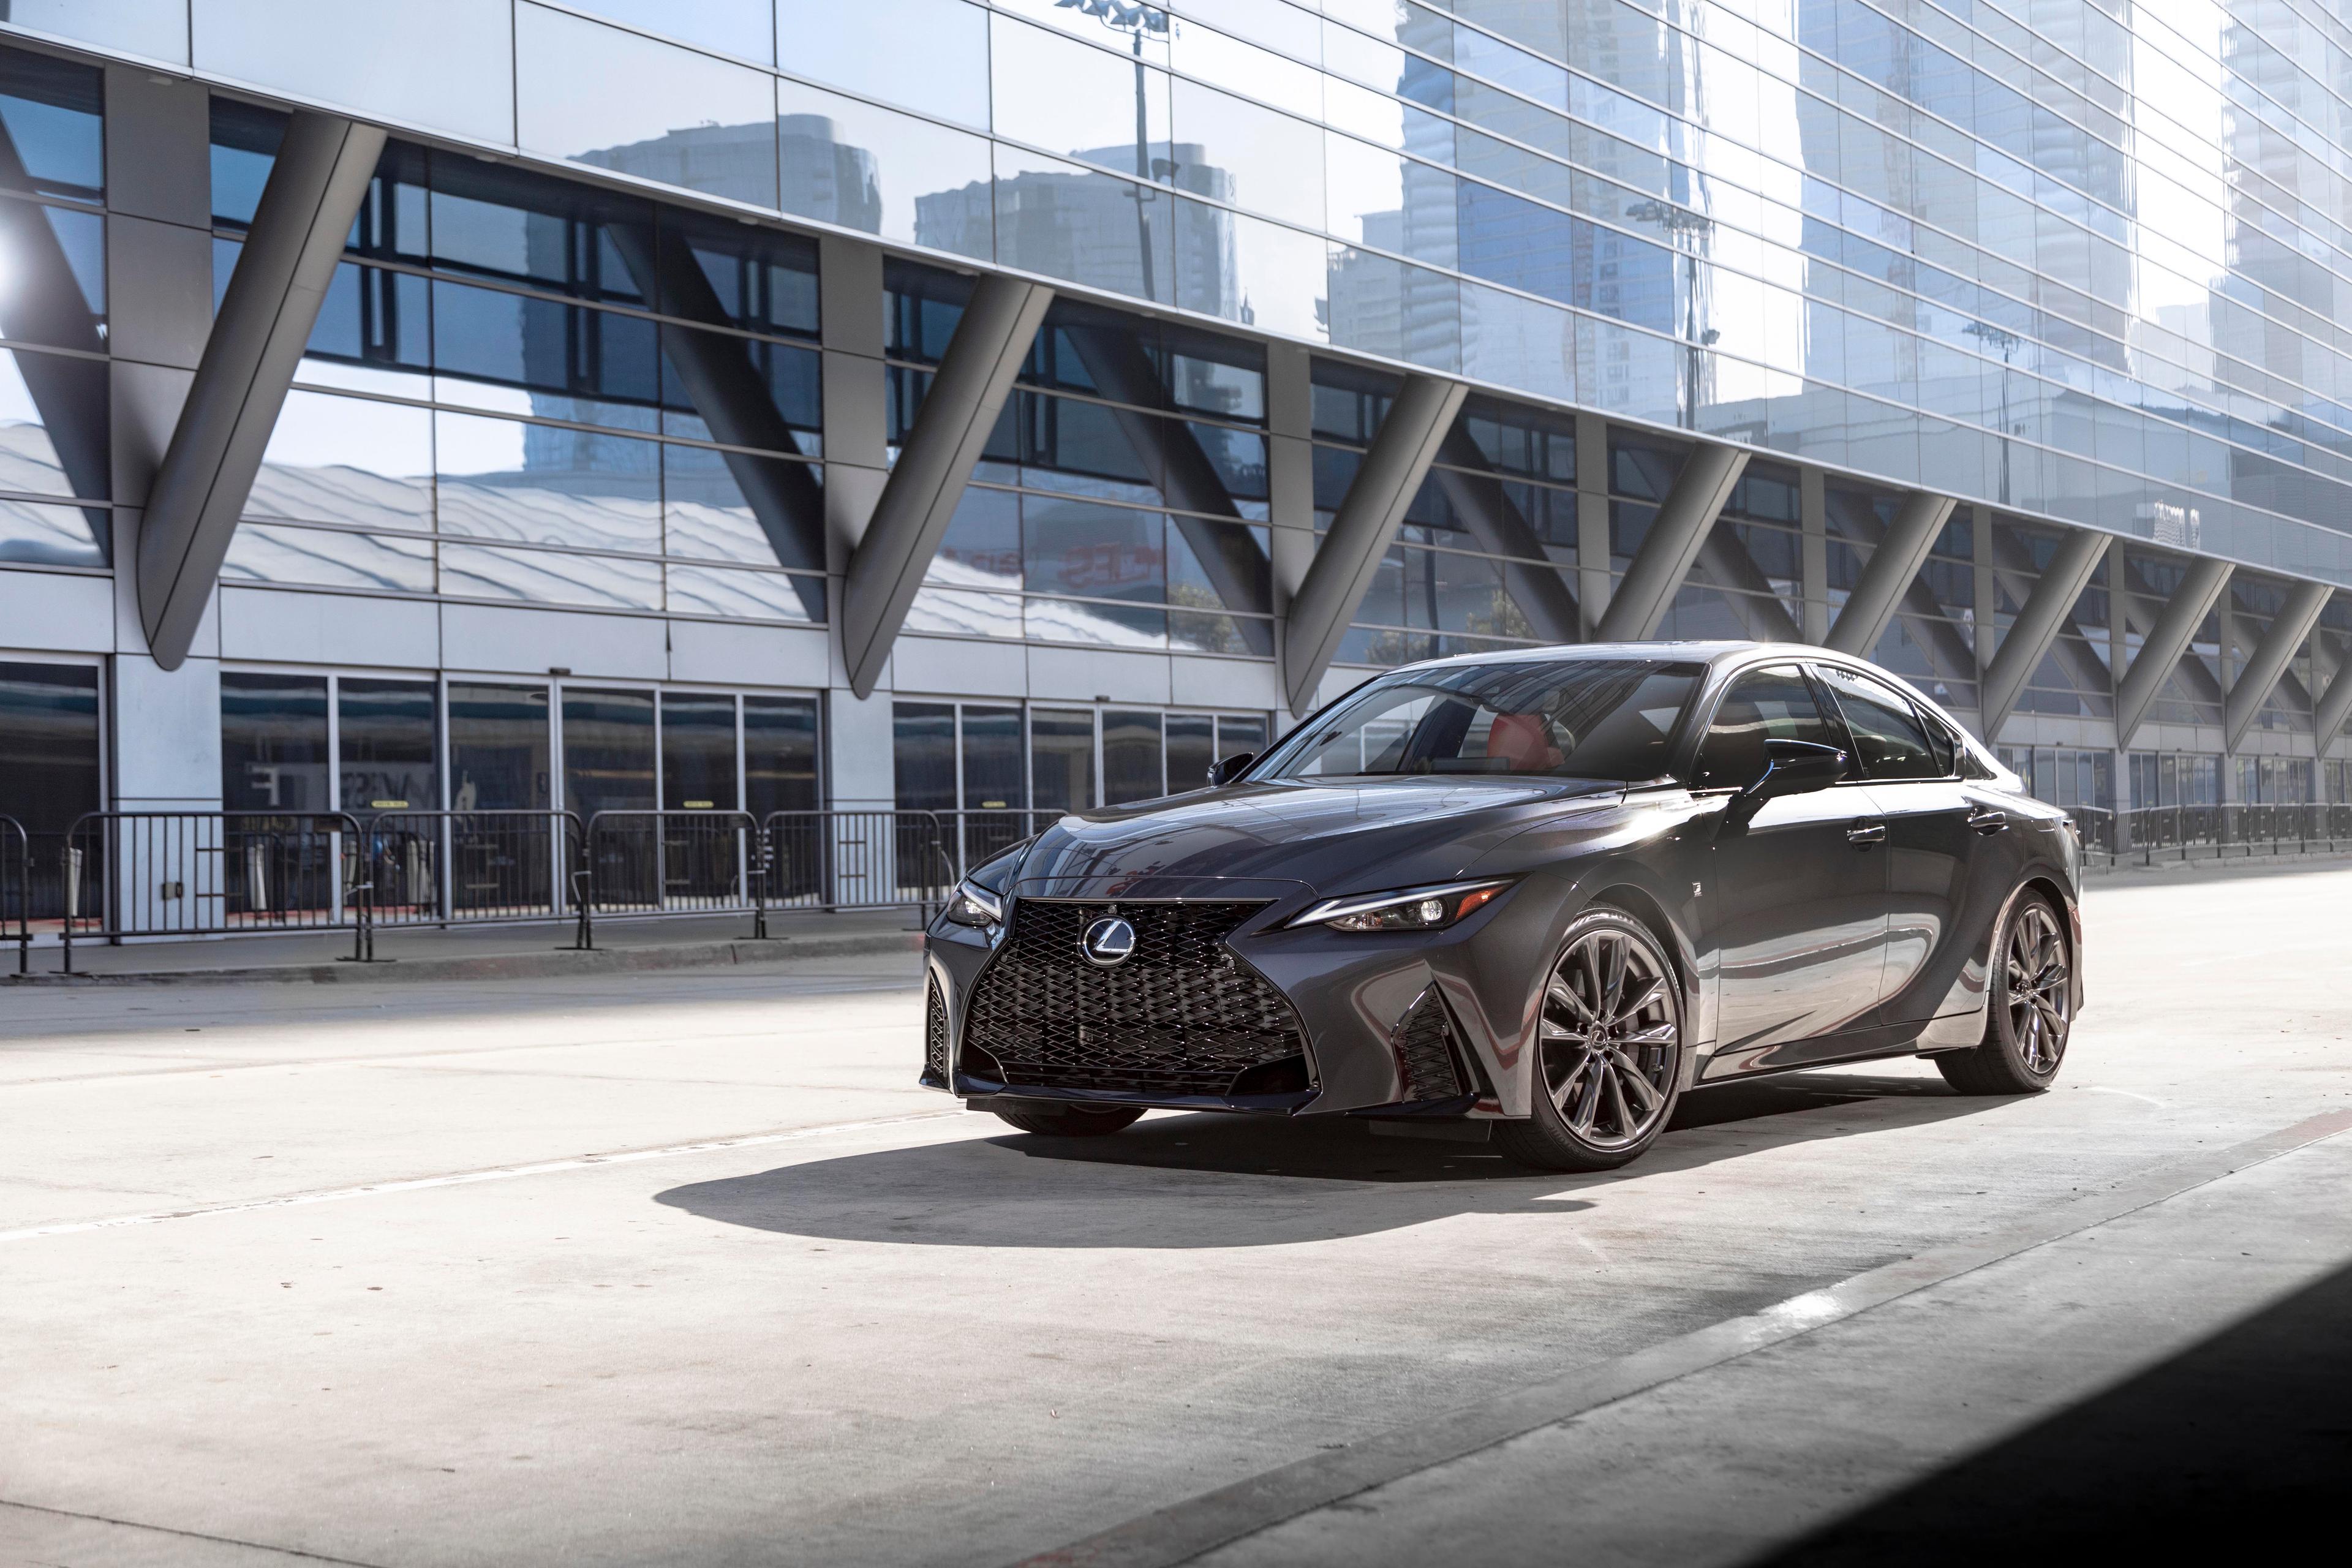 The Lexus IS 350 has been a reliable and luxurious choice for years.